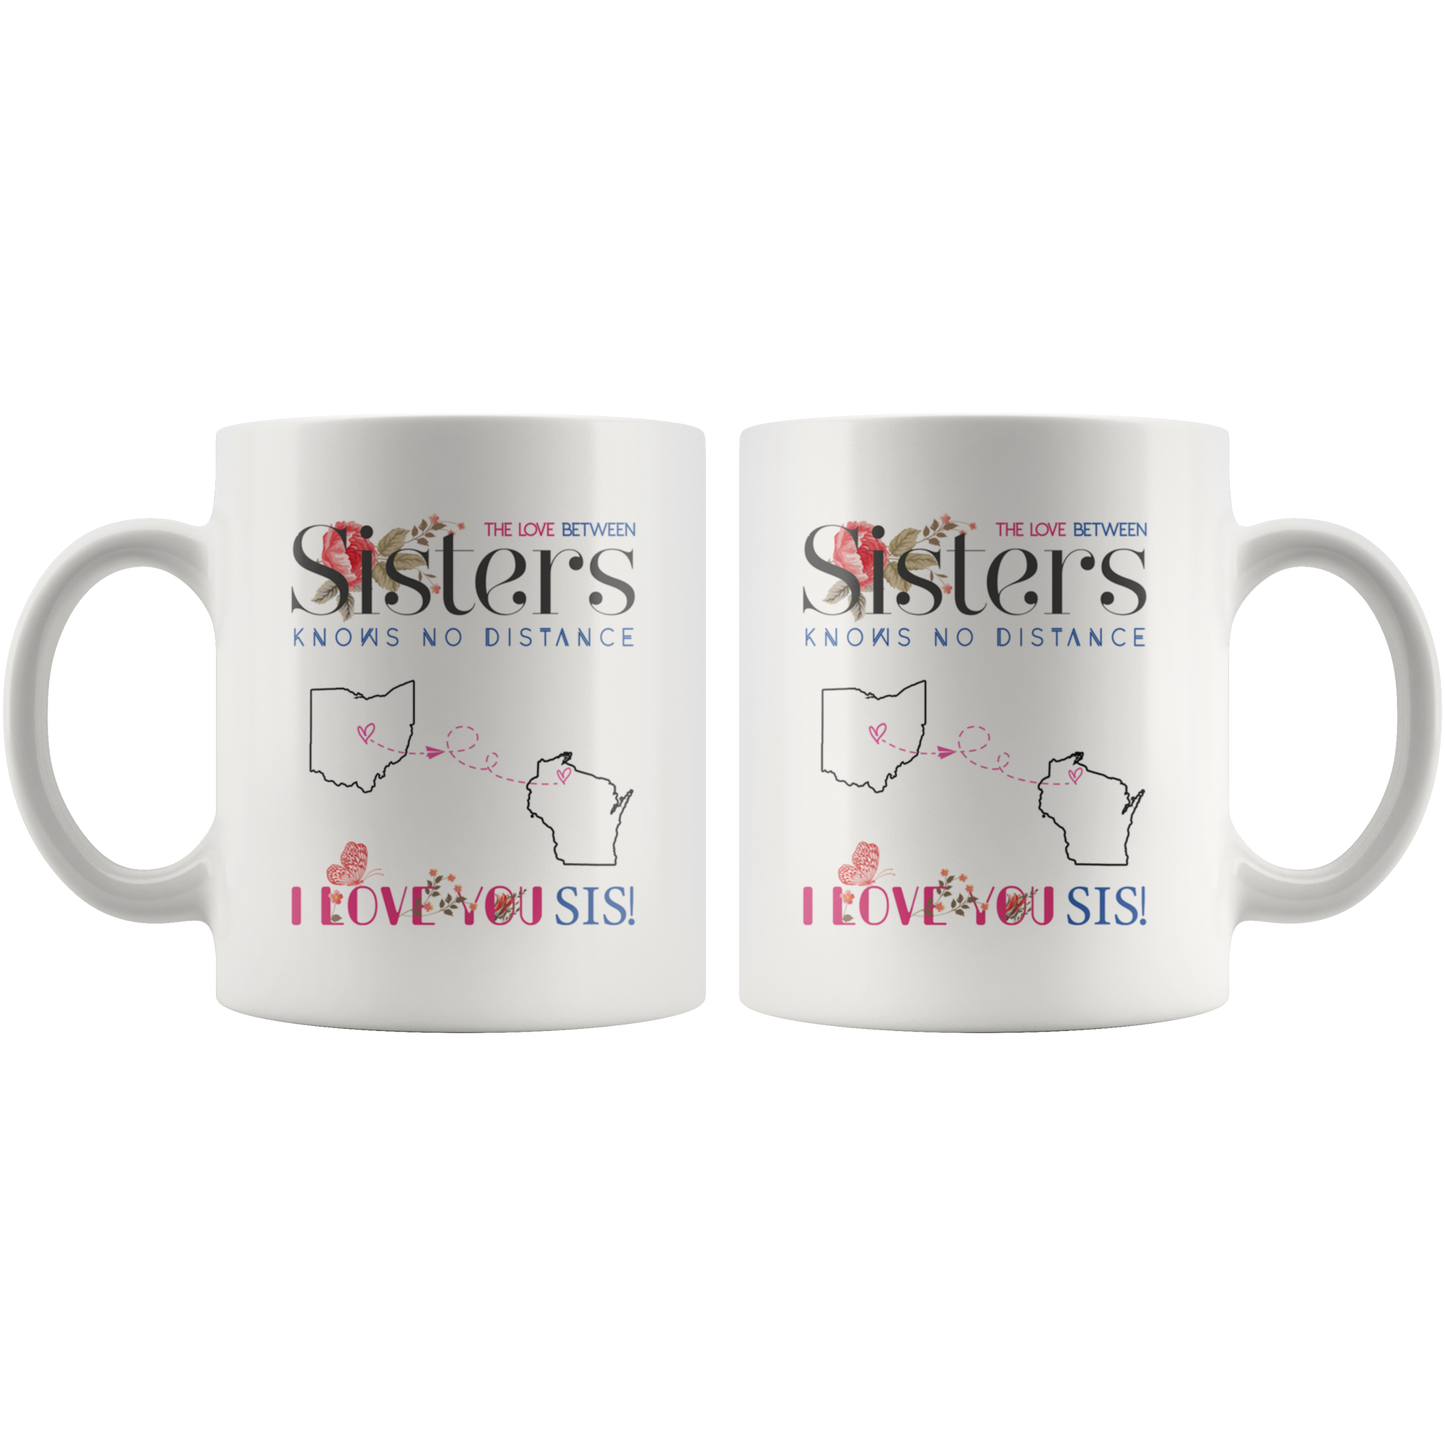 M-20520002-sp-22786 - Long Distance Relationship Gift - The Love Between Sisters K